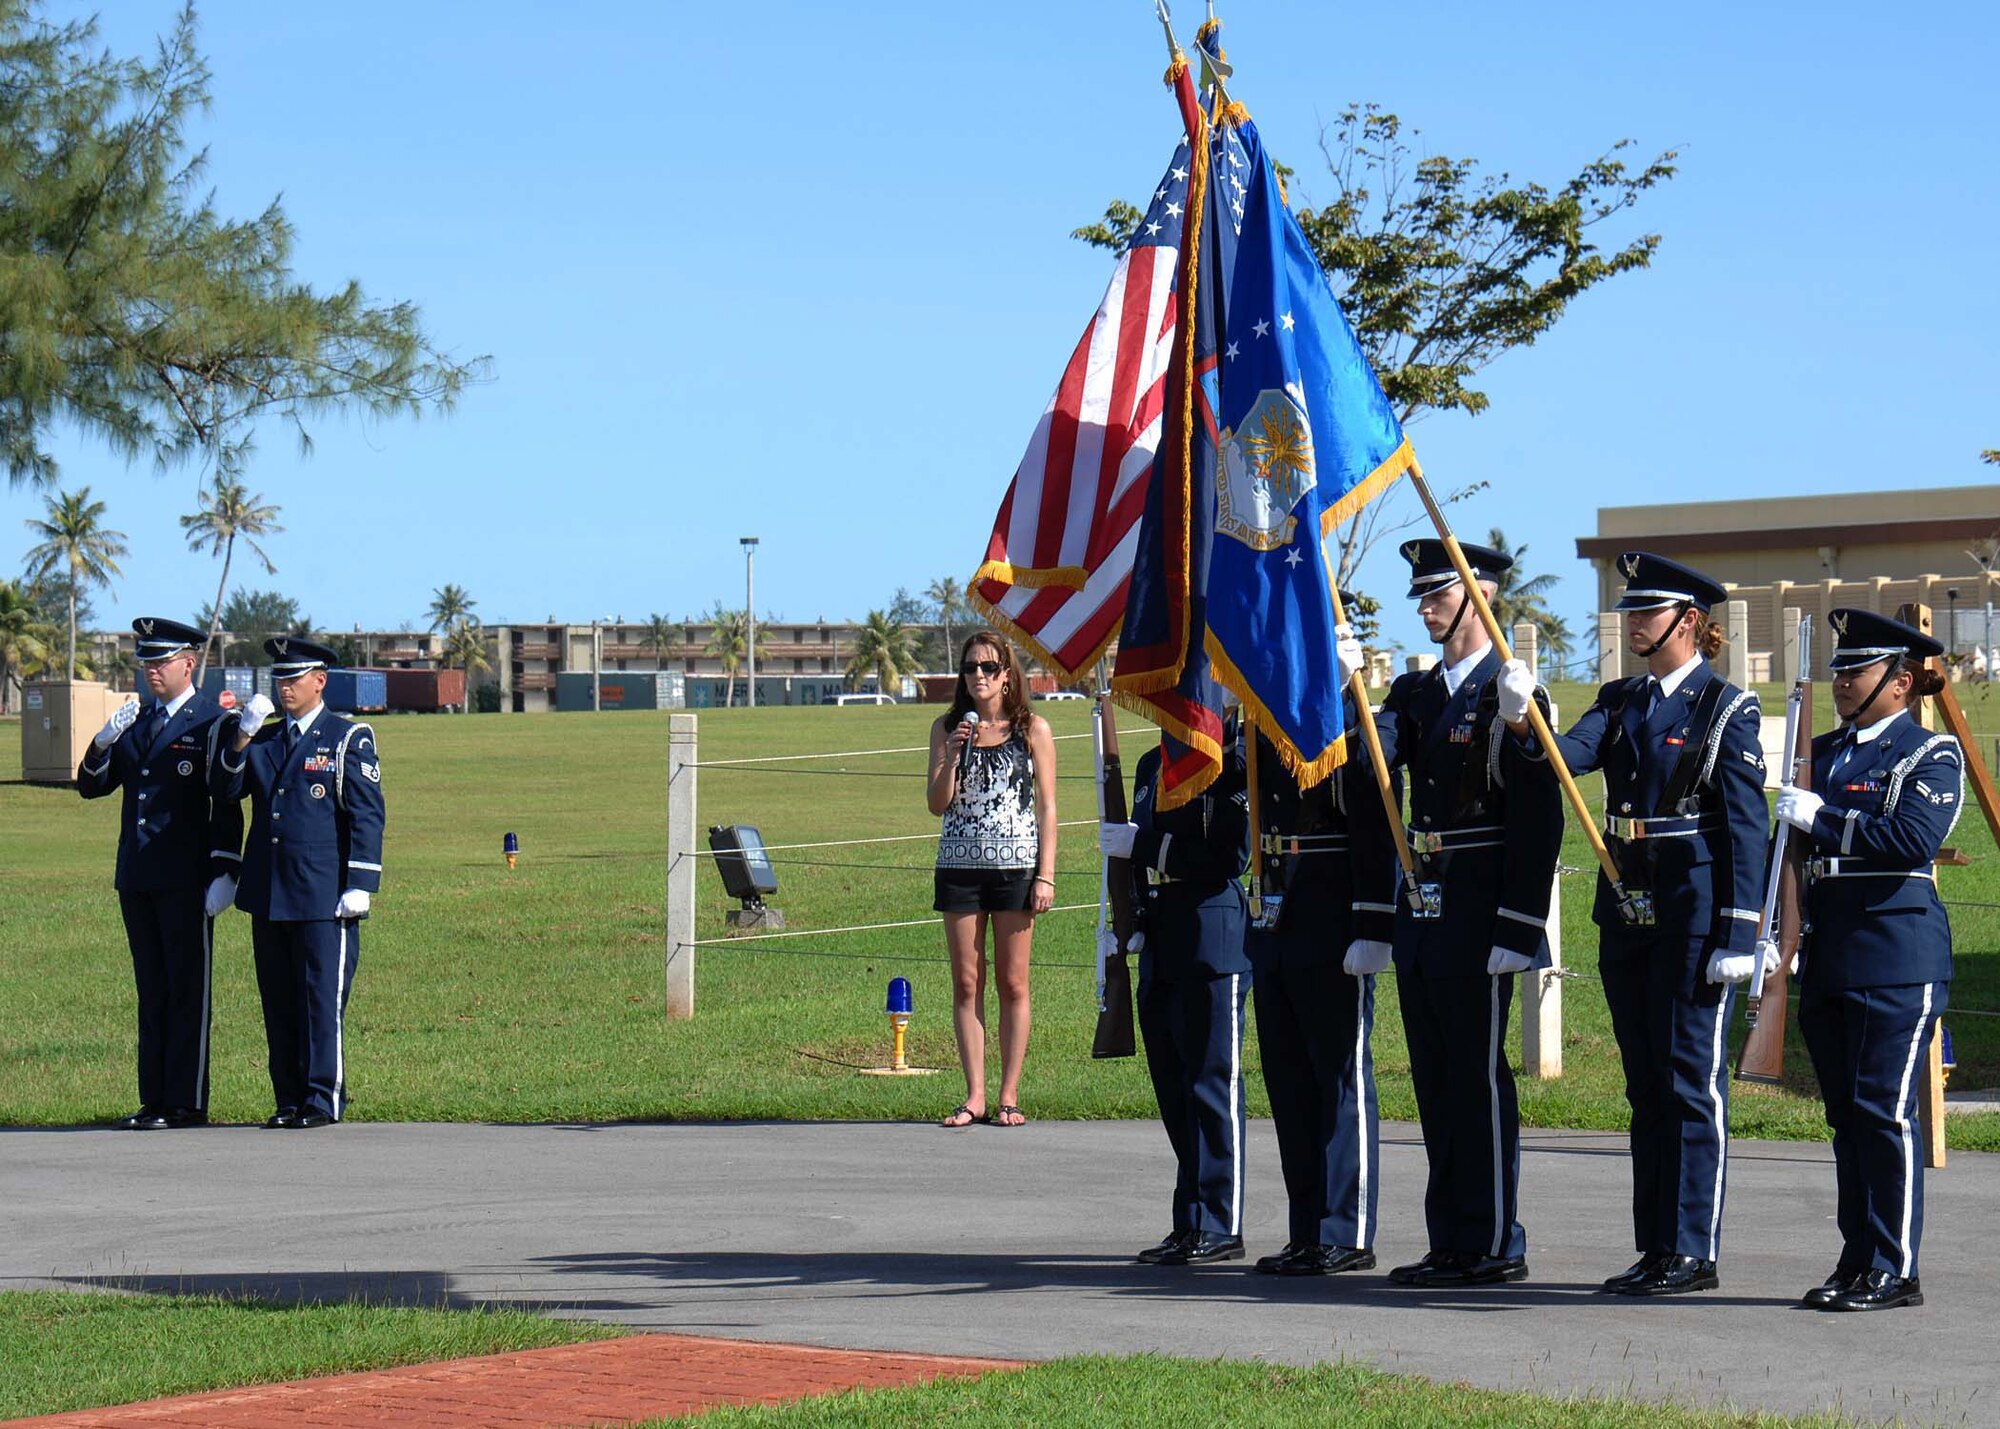 ANDERSEN AIR FORCE BASE, Guam -- The Team Andersen Honor Guard present the flags as Airman 1st Class Heather Wells, 36th Operations Support Squadron, sings the National Anthem at the Arc Light Memorial Park here for the Operation Linebacker II Ceremony Dec. 18. Members of the 36th Expeditionary Bomb Squadron sponsored this year's ceremony, commemorating its 36th anniversary. (U.S. Air Force photo by Senior Airman Sonya Croston)